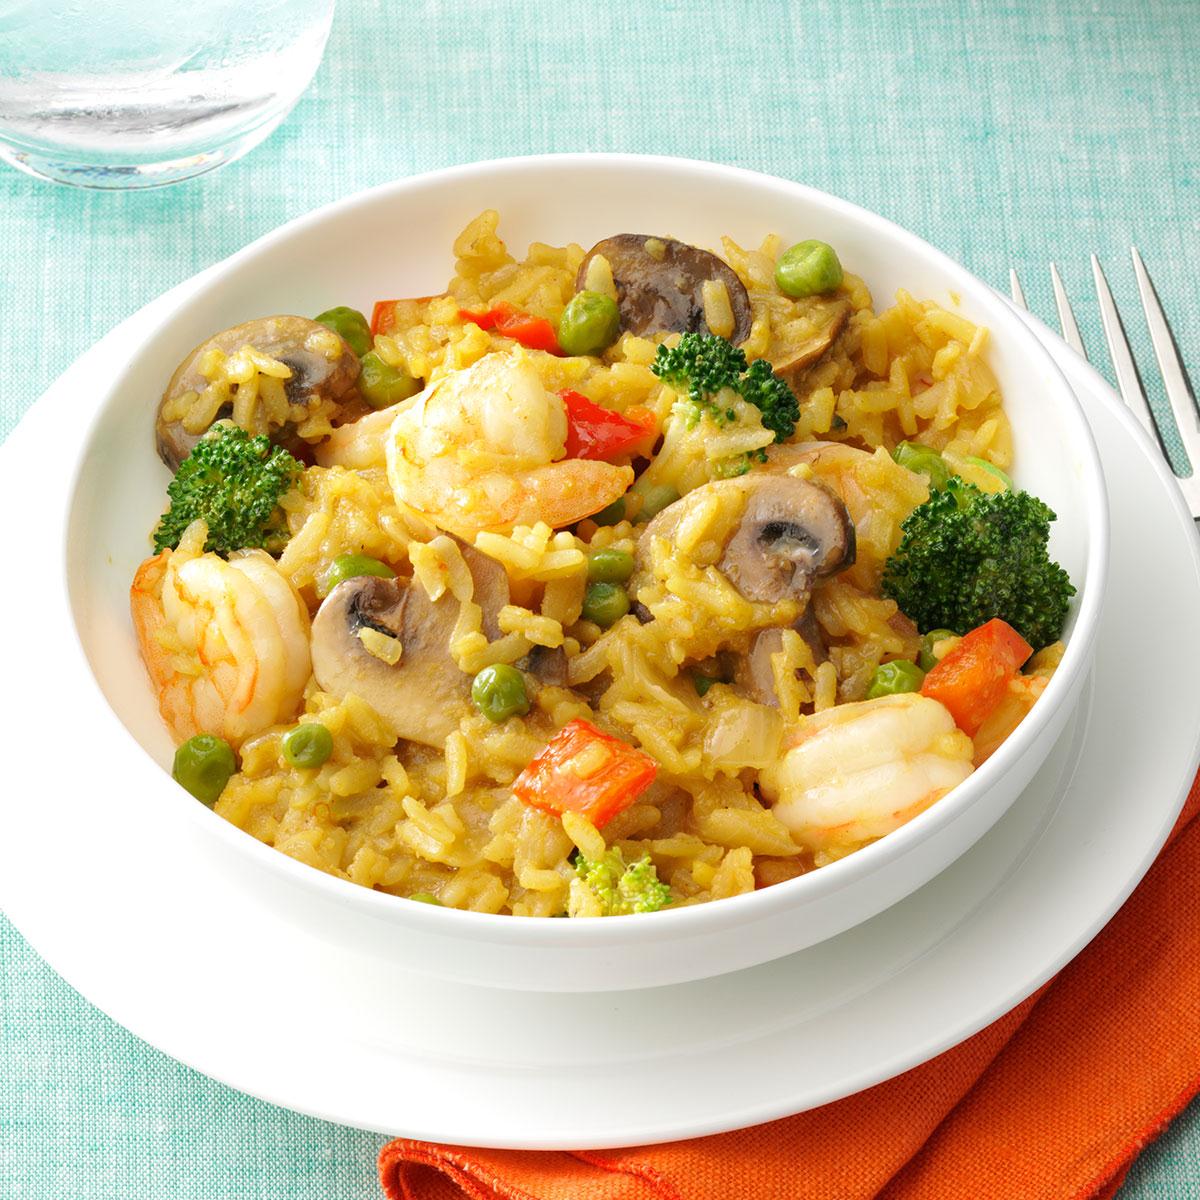 Shrimp Broccoli Brown Rice Paella Recipe Taste Of Home,How To Soundproof A Room From Outside Noise